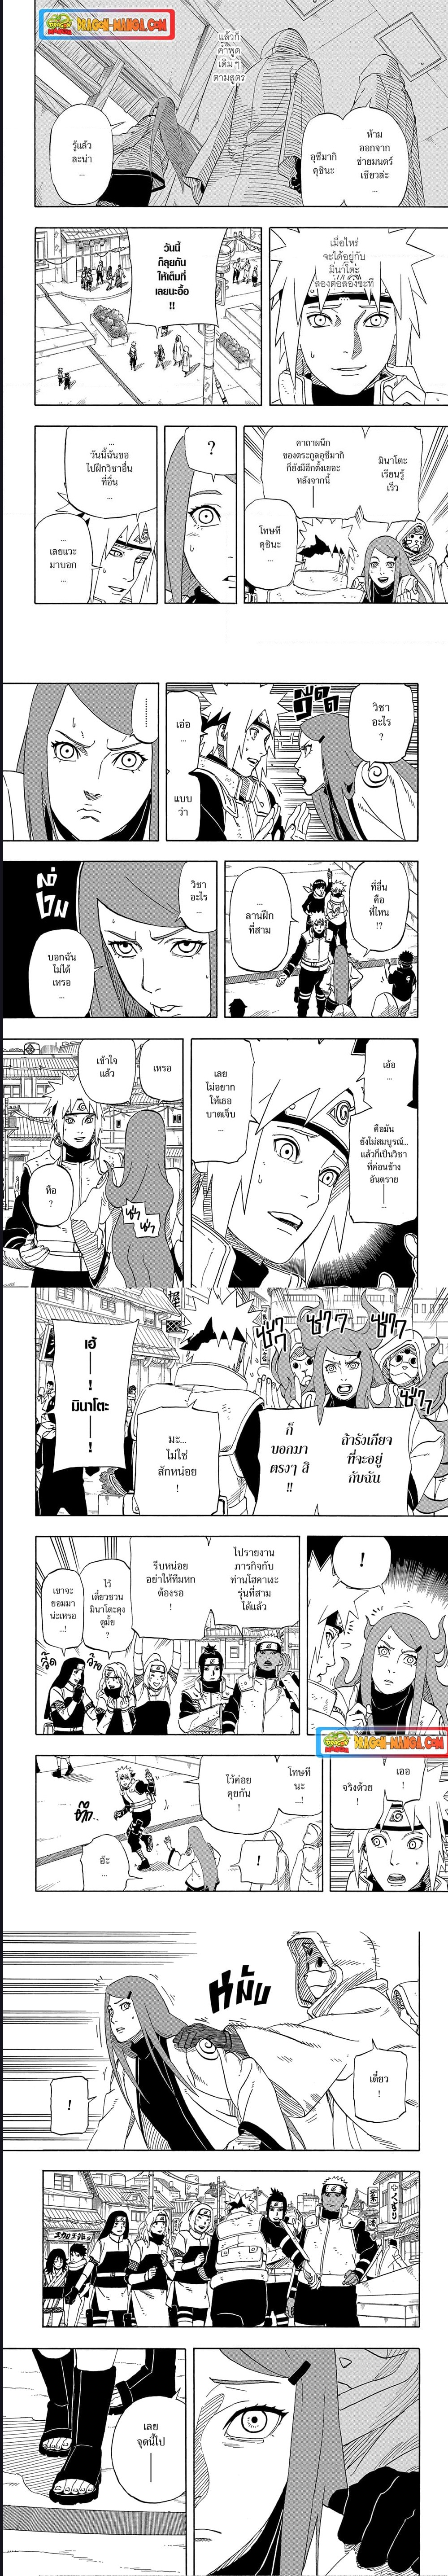 Naruto The Whorl within the Spiral ตอนที่ 1 (4)